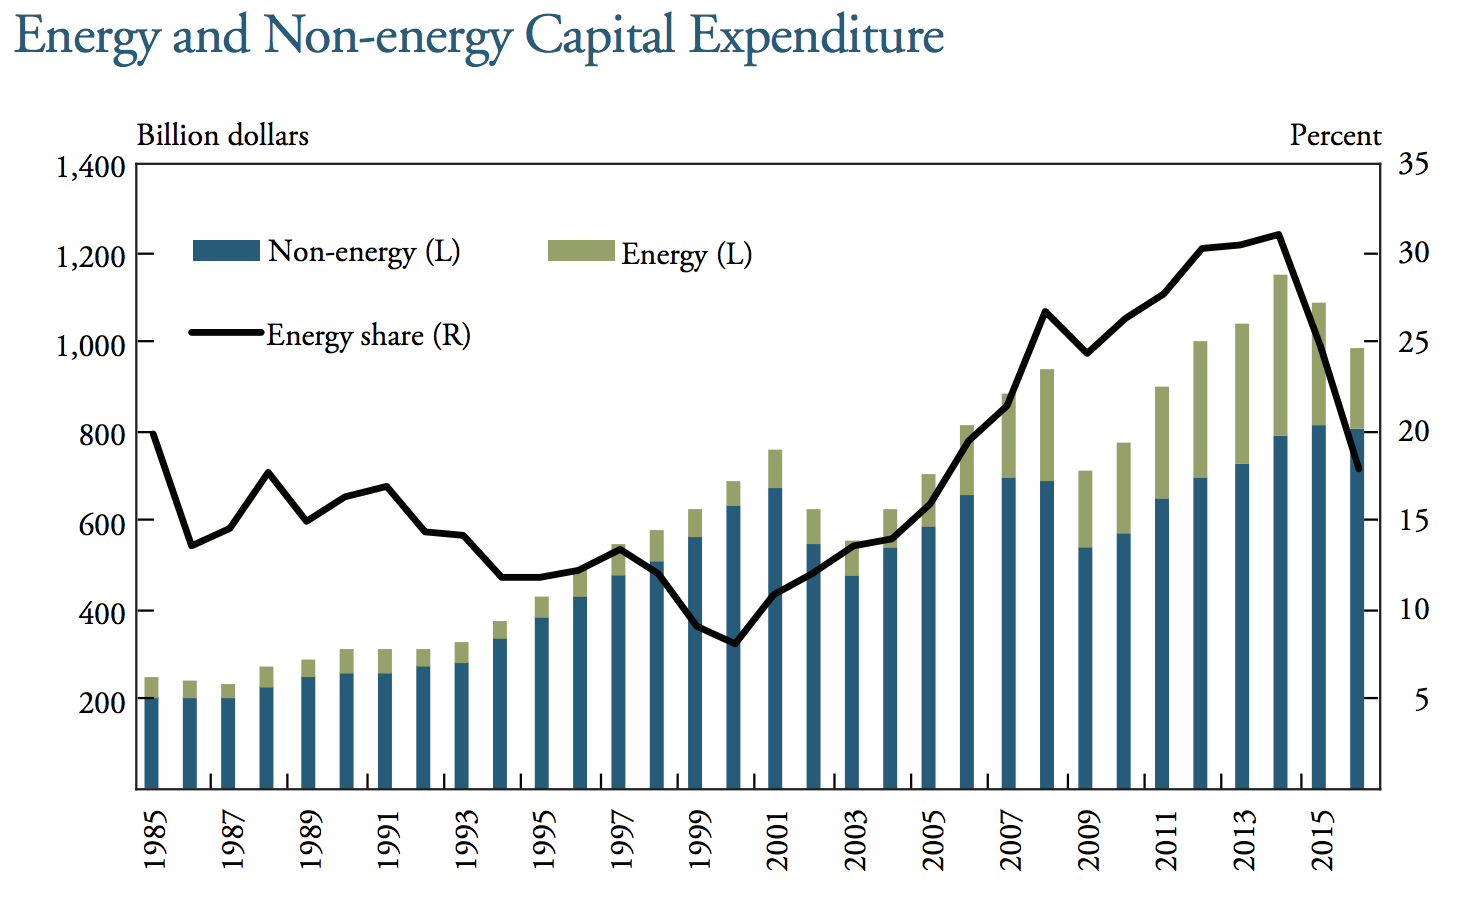 Chart comparing energy capex to overall US economy-wide capex